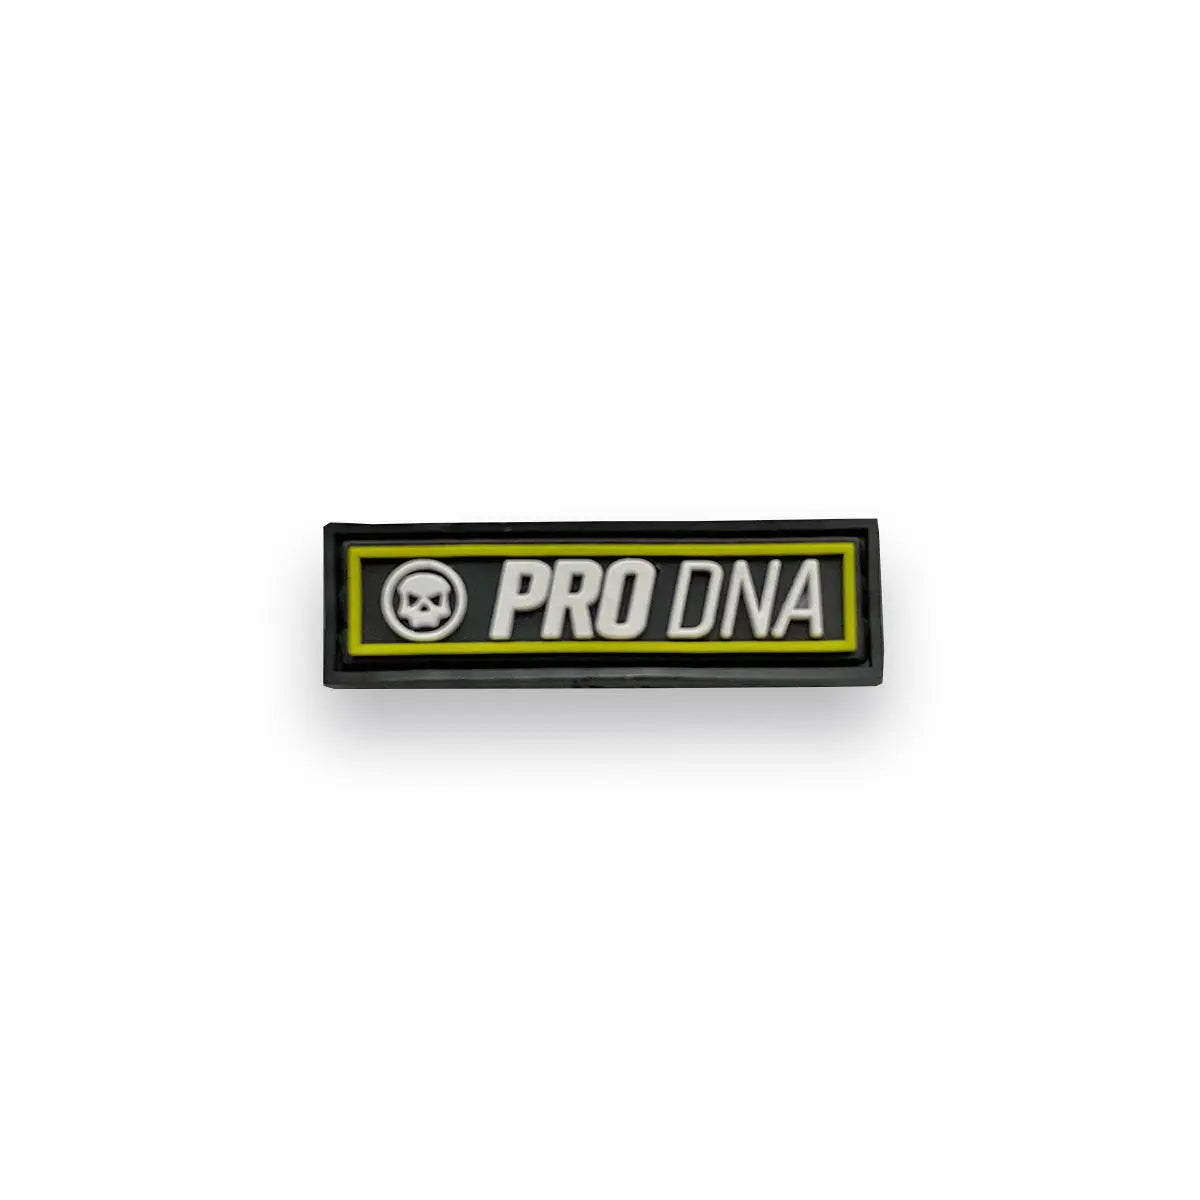 Pro DNA Mini Patch Infamous Paintball